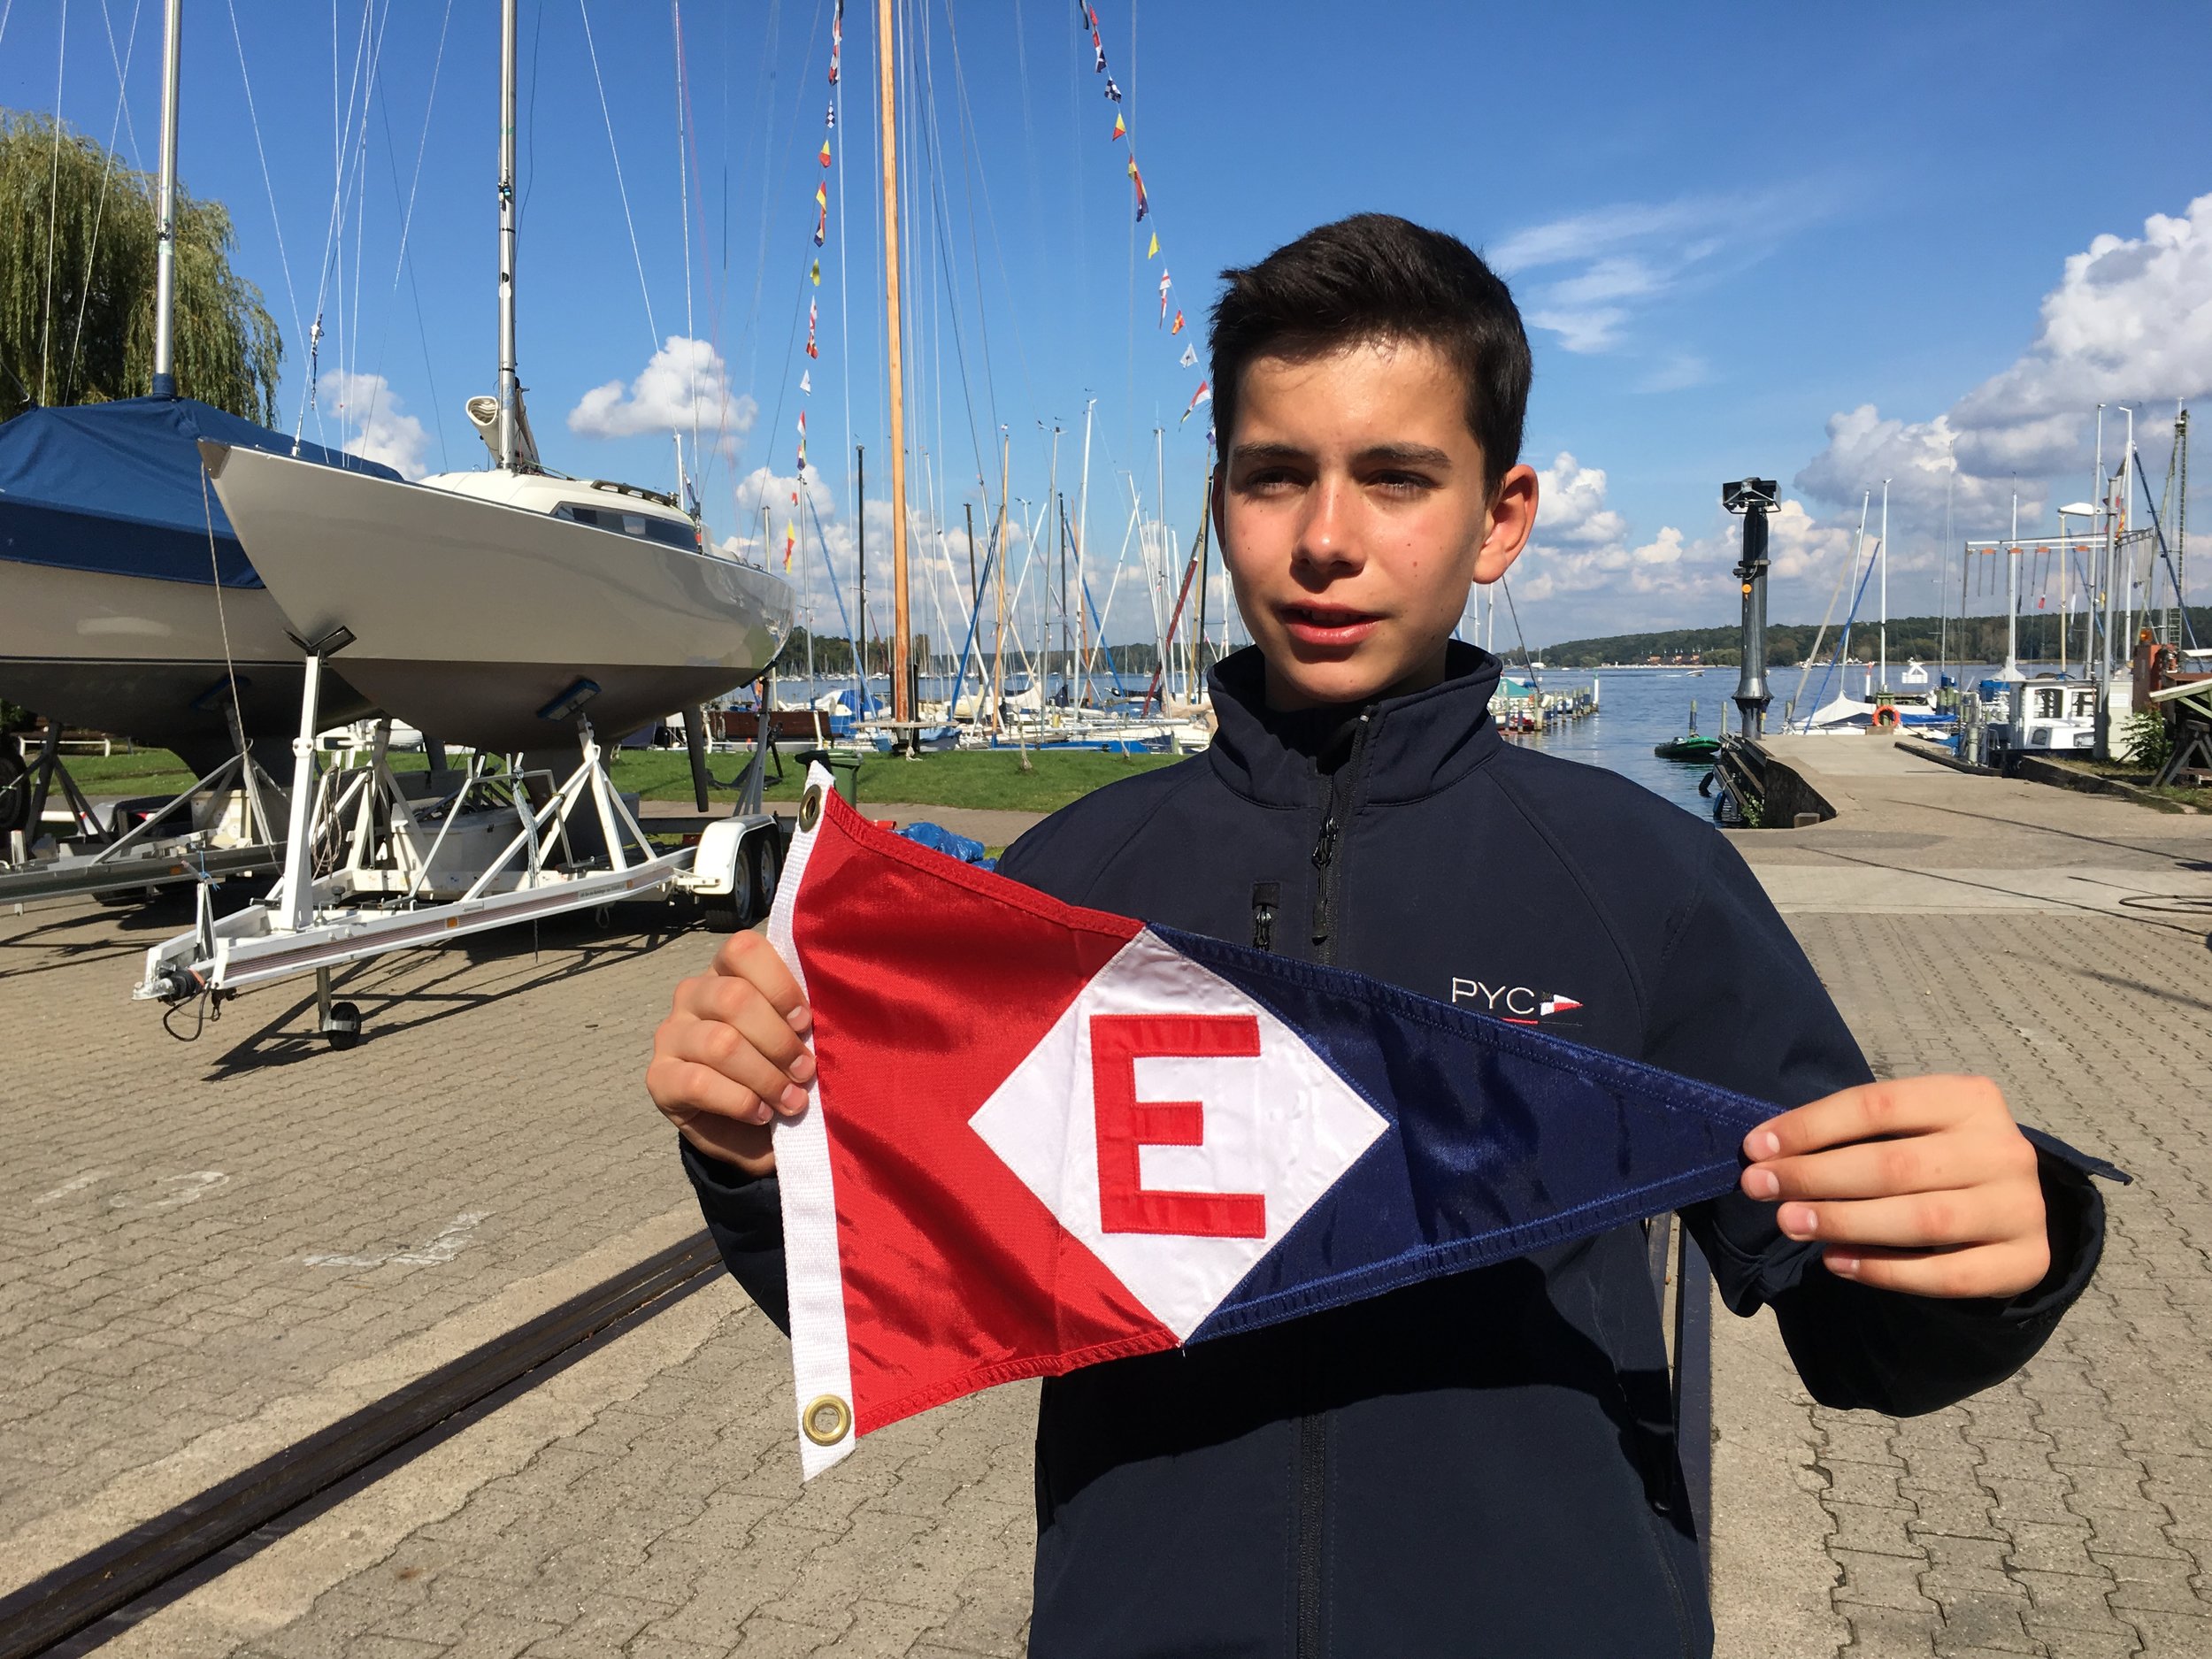  Hendrick and his mom Sigrun visited our club last summer and exchanged burgees with from their club with EYC. Here's Hendrick at Potsdamer Yacht Club in Germany showing our colors. 